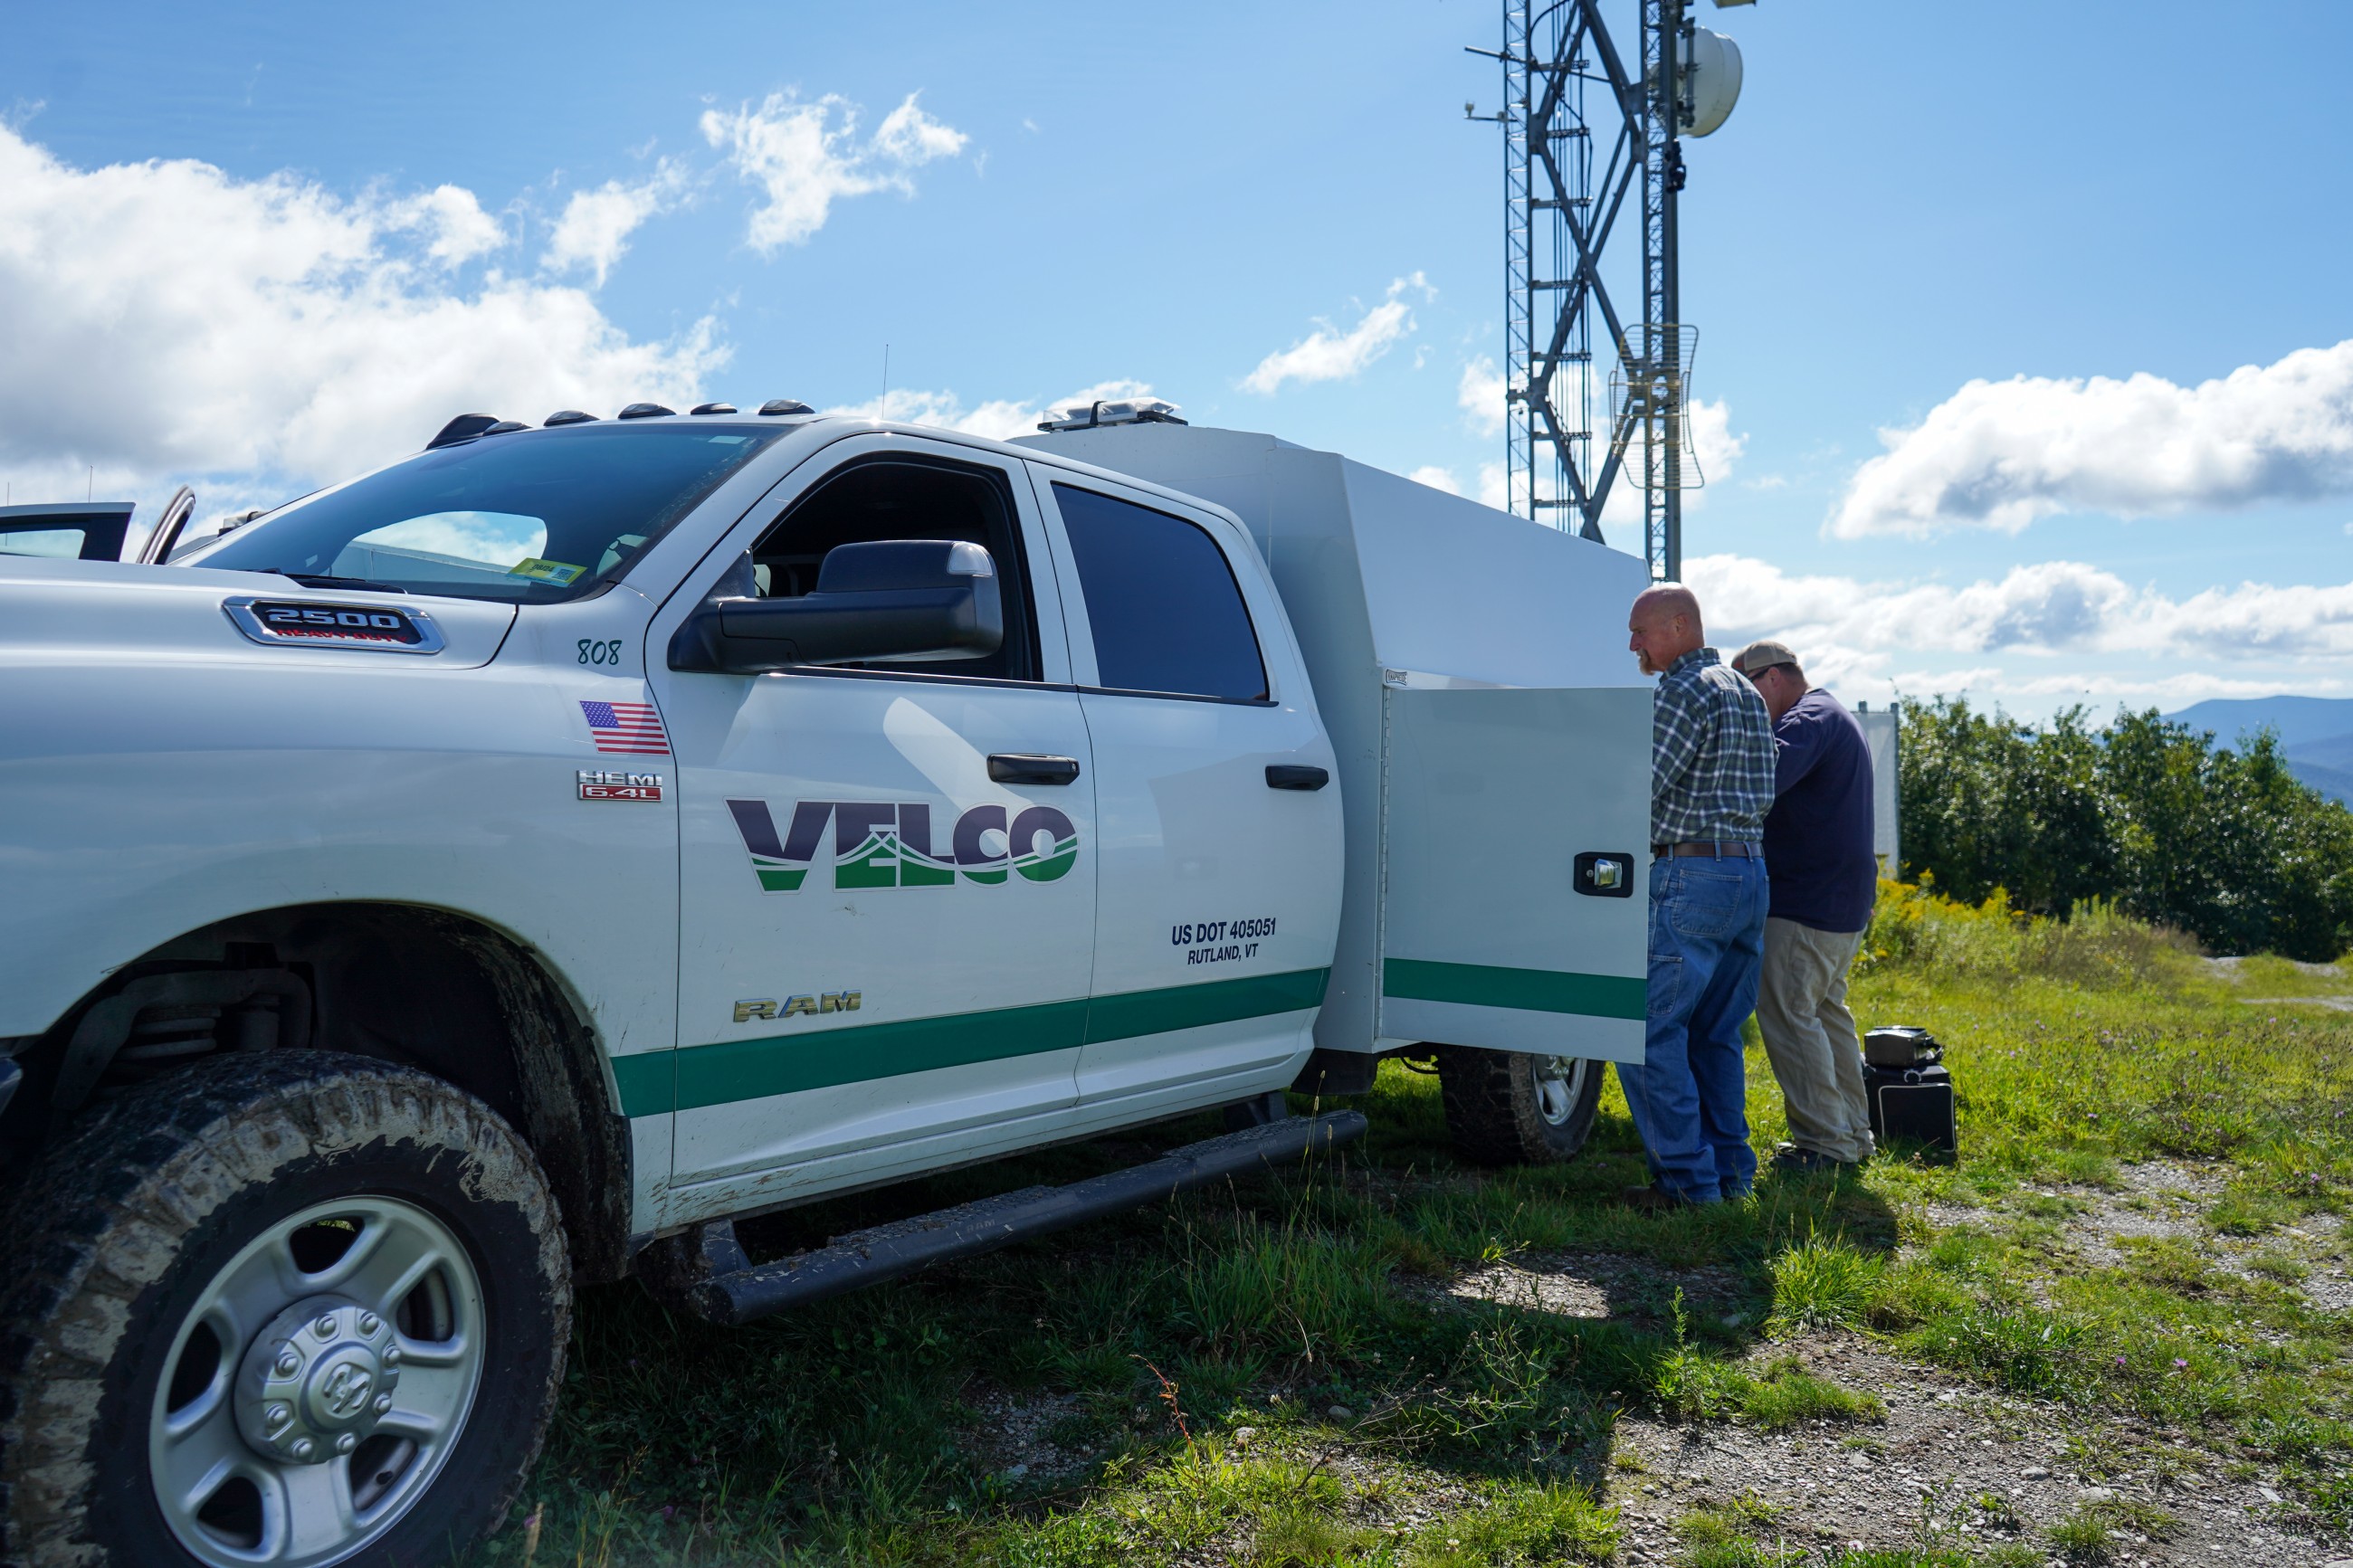 Velco workers with service truck